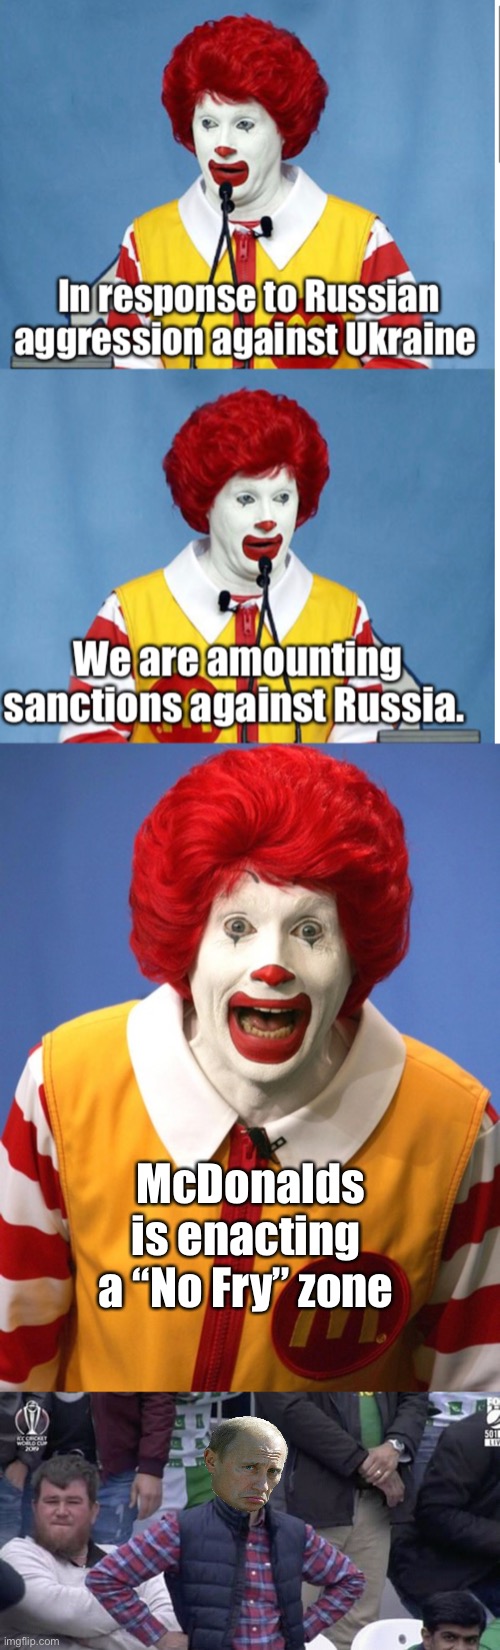 McDonalds is enacting  a “No Fry” zone | image tagged in ronald mcdonald,annoyed man,stupid memes | made w/ Imgflip meme maker